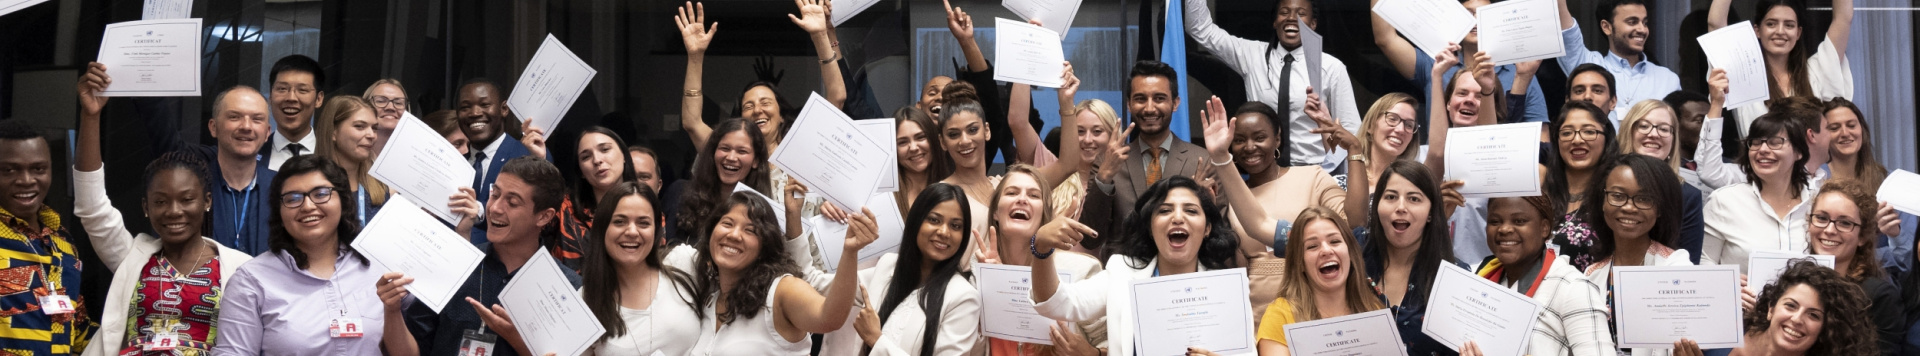 A group of students cheerfully showing their certificates